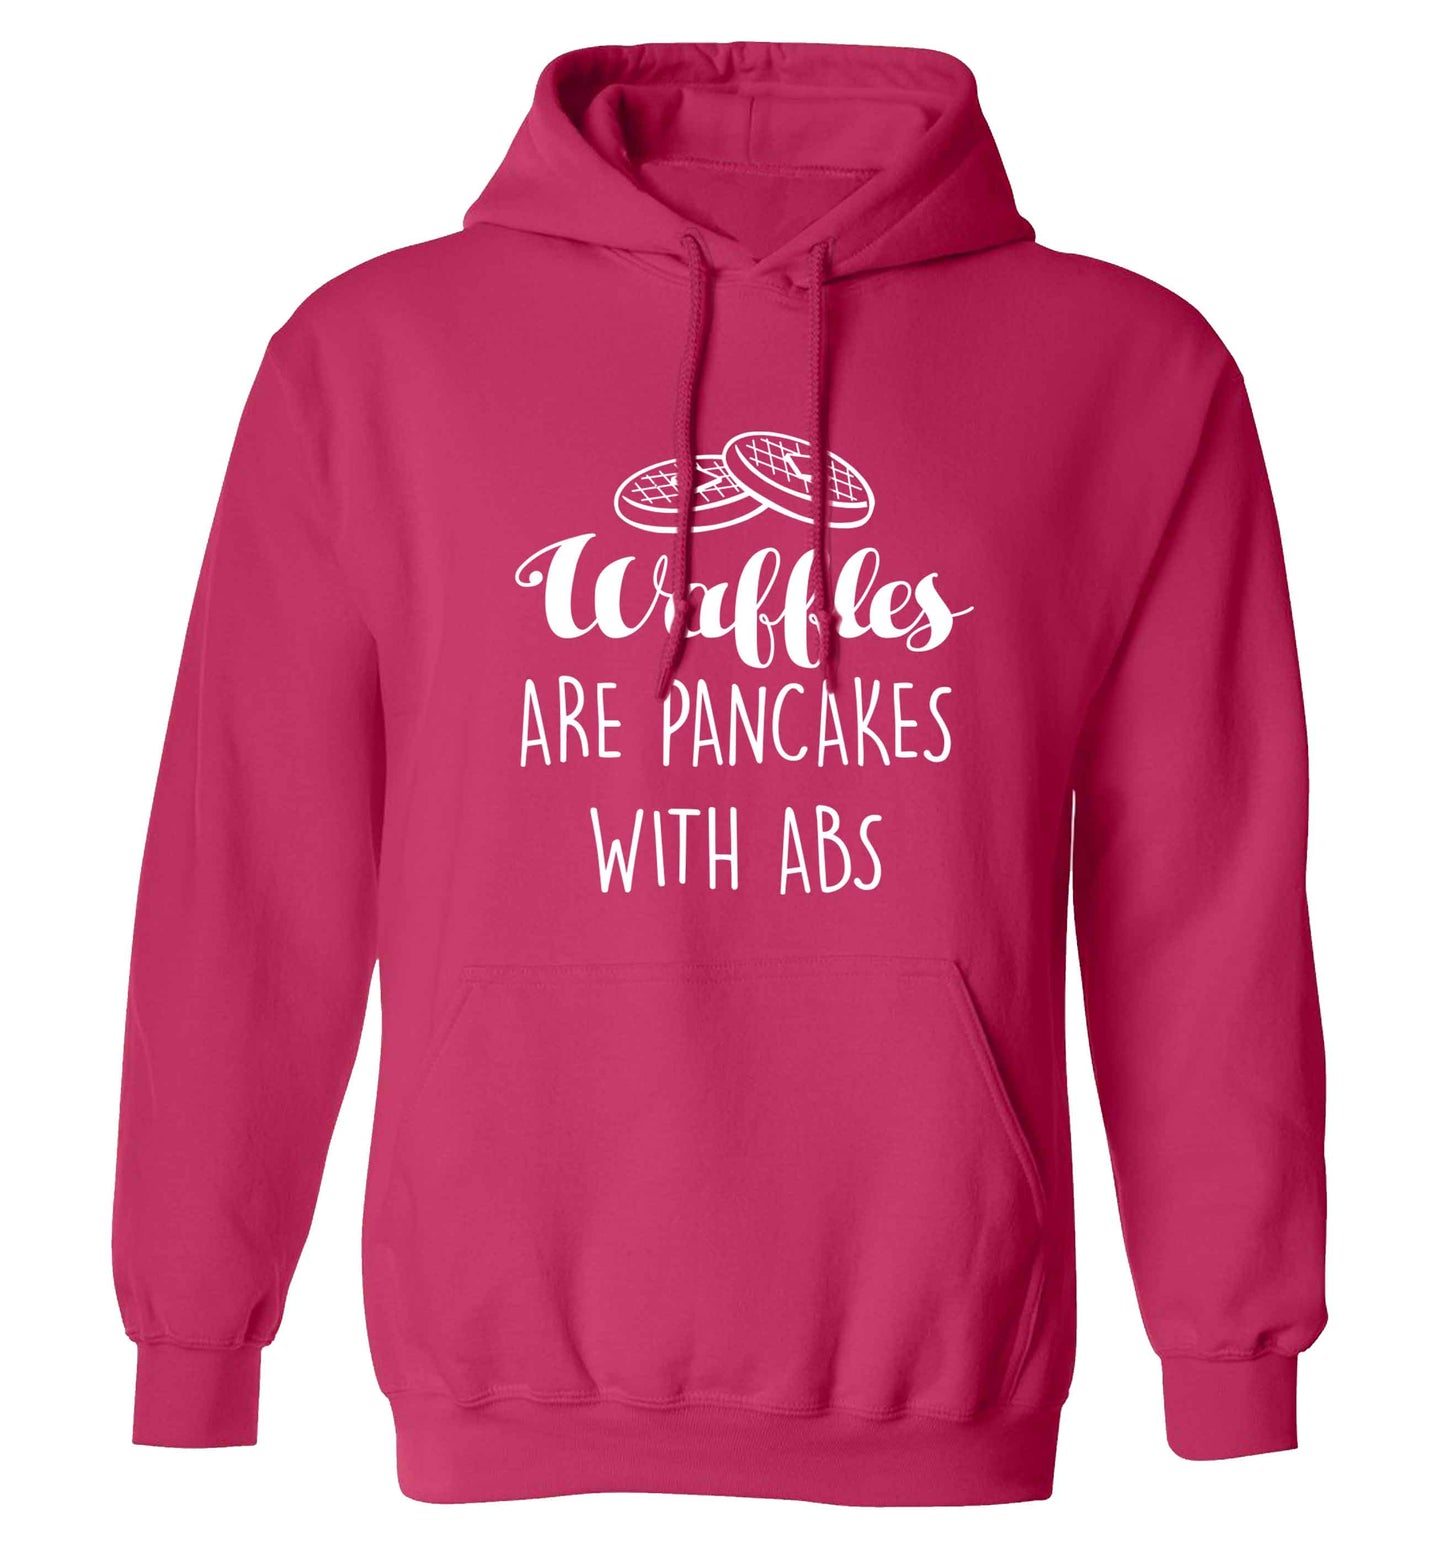 Waffles are just pancakes with abs adults unisex pink hoodie 2XL